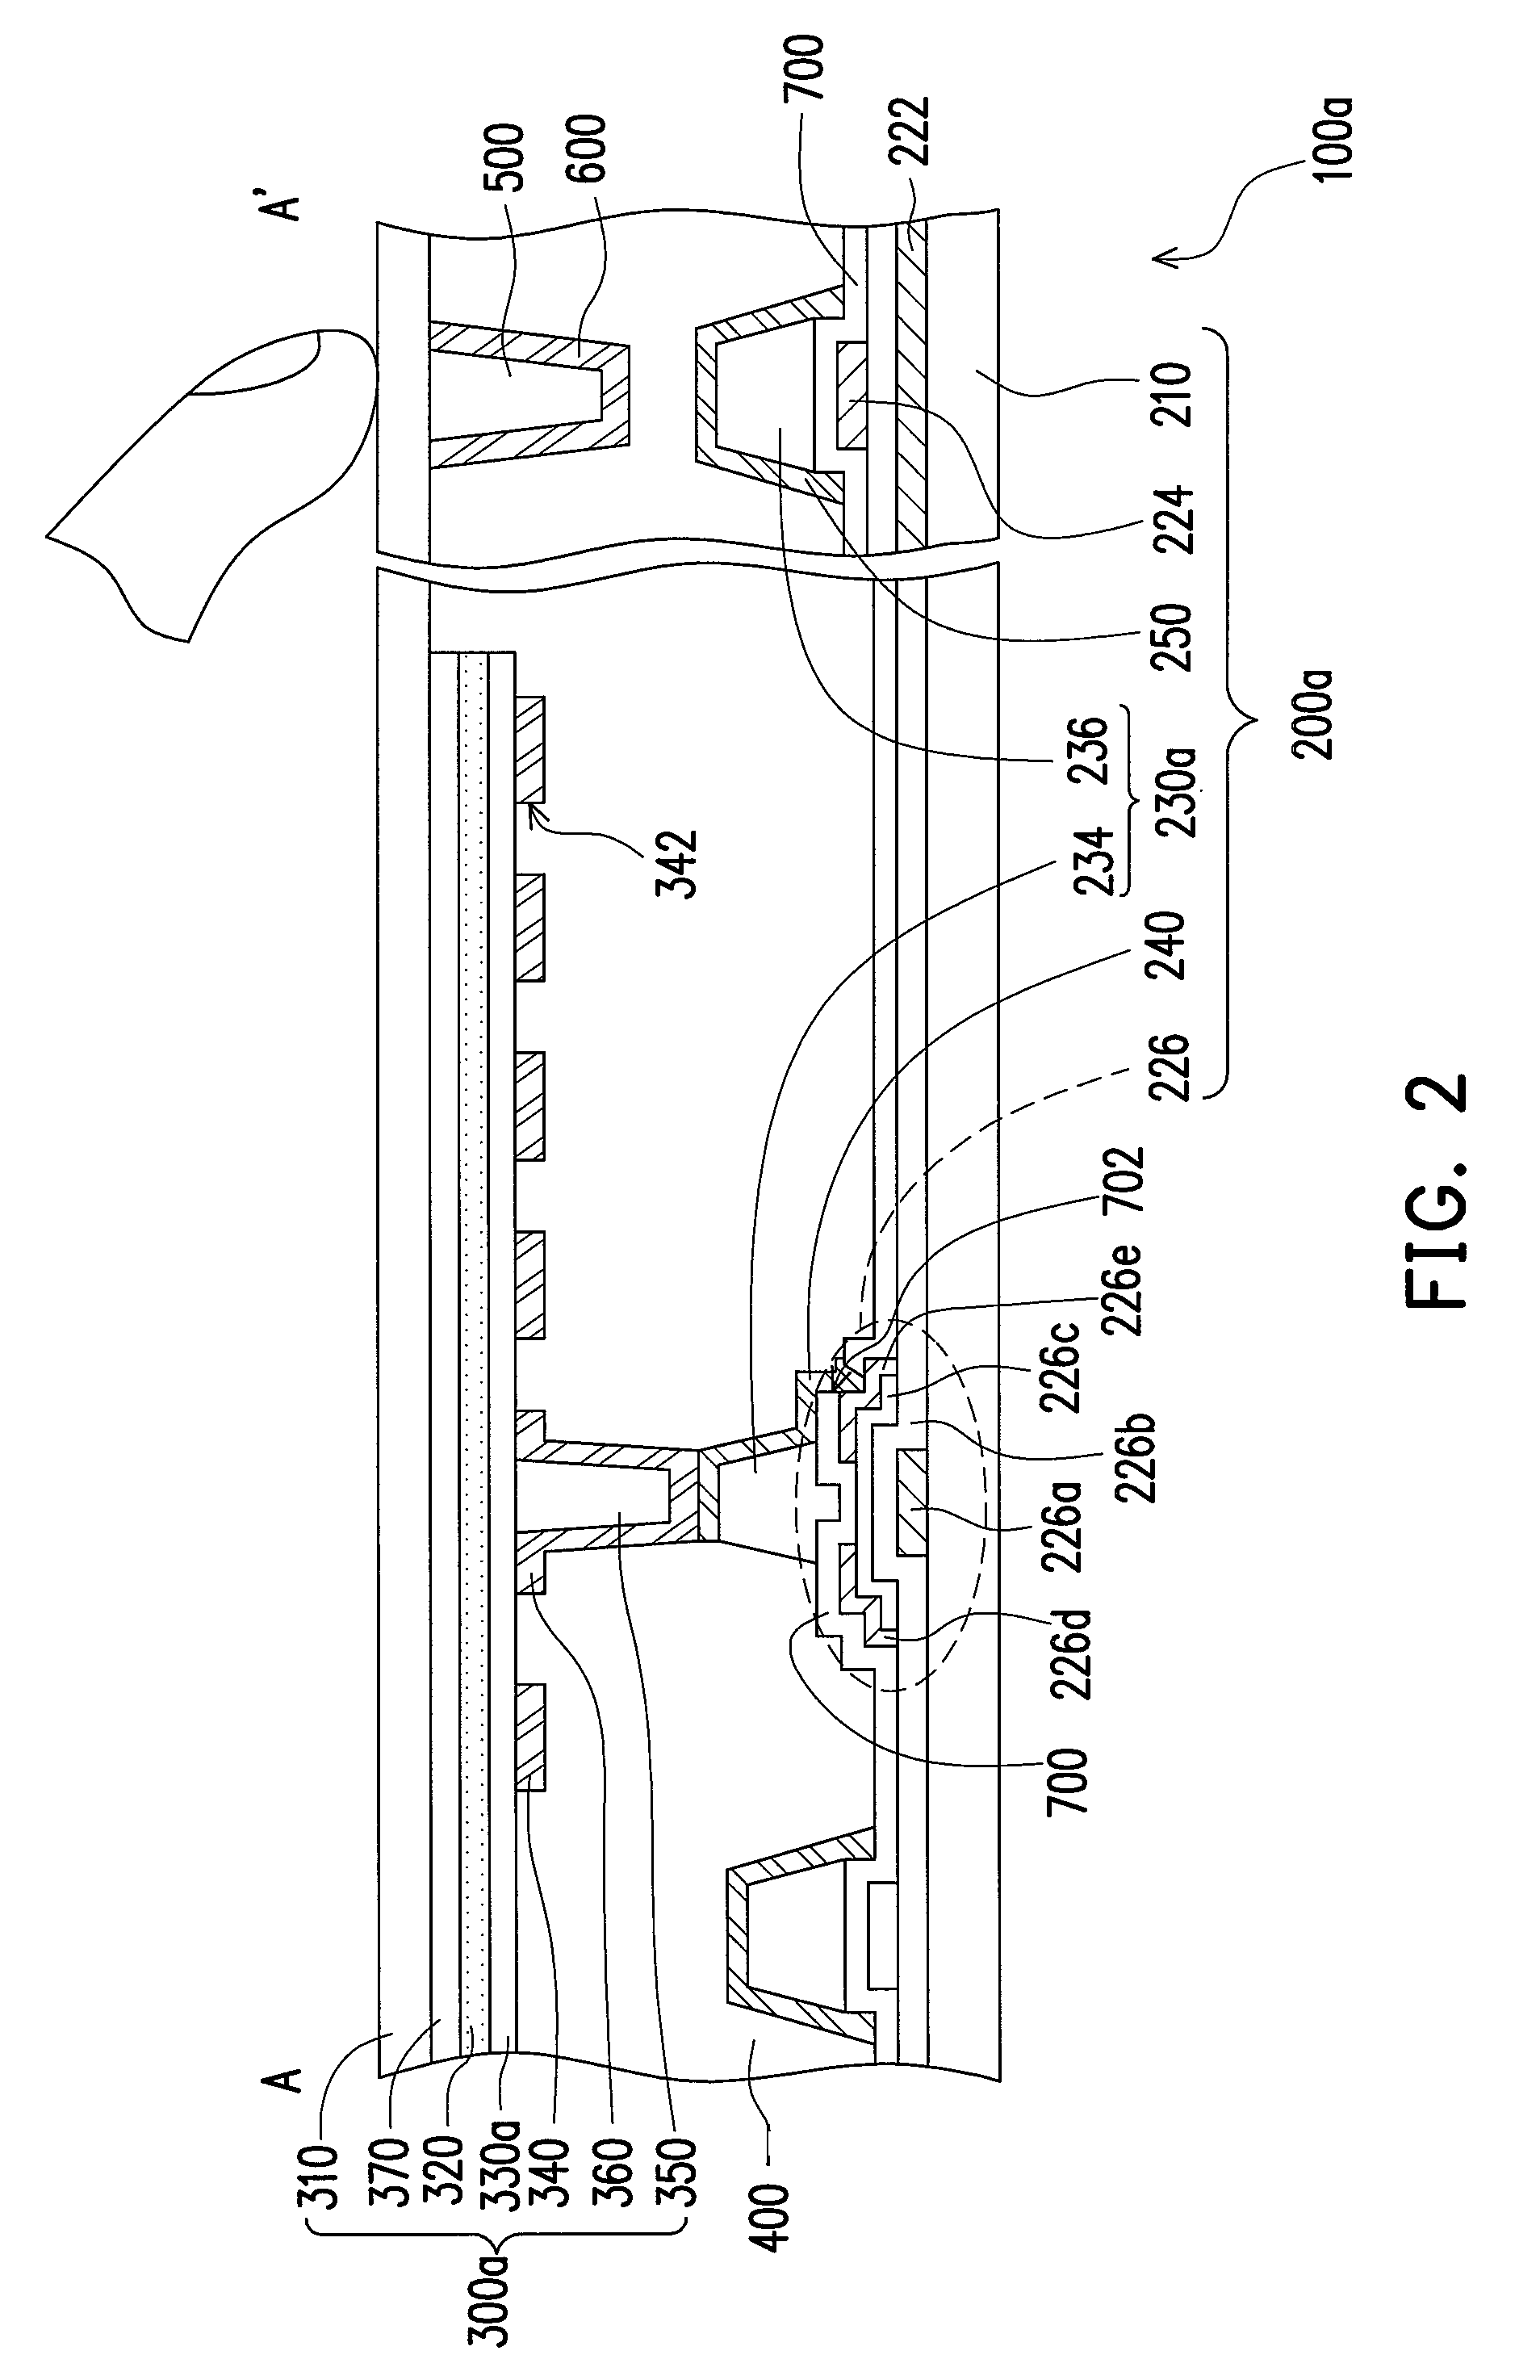 Liquid crystal display panel comprising first connecting electrodes disposed on a padding device and electrically connected to active devices and to second connecting electrodes